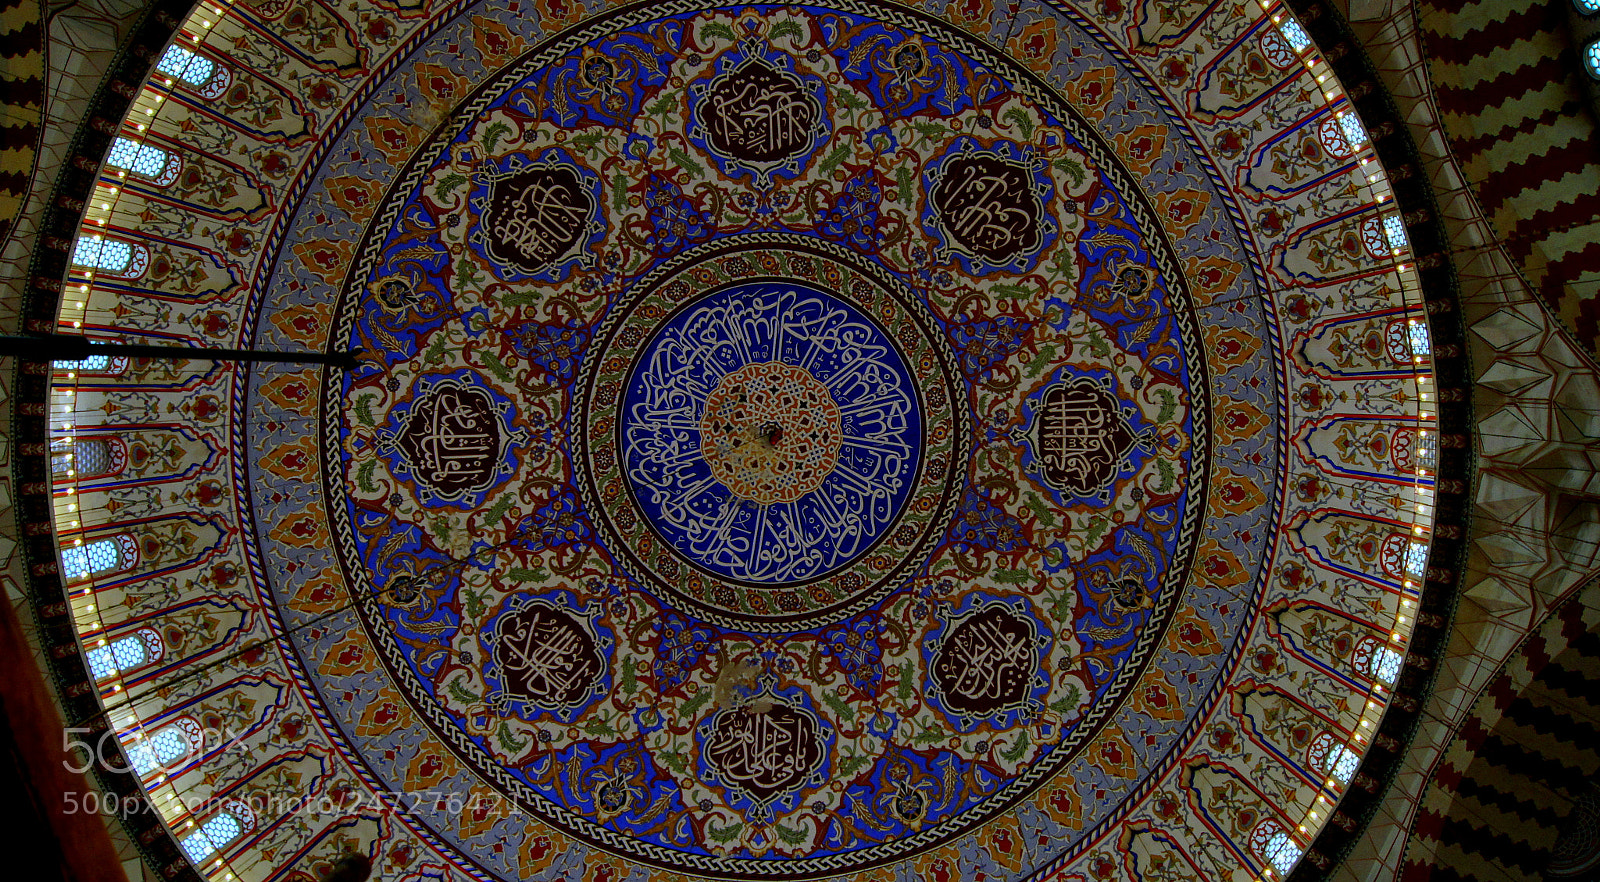 Sony SLT-A55 (SLT-A55V) sample photo. Ceiling processing (selimiye mosque) photography